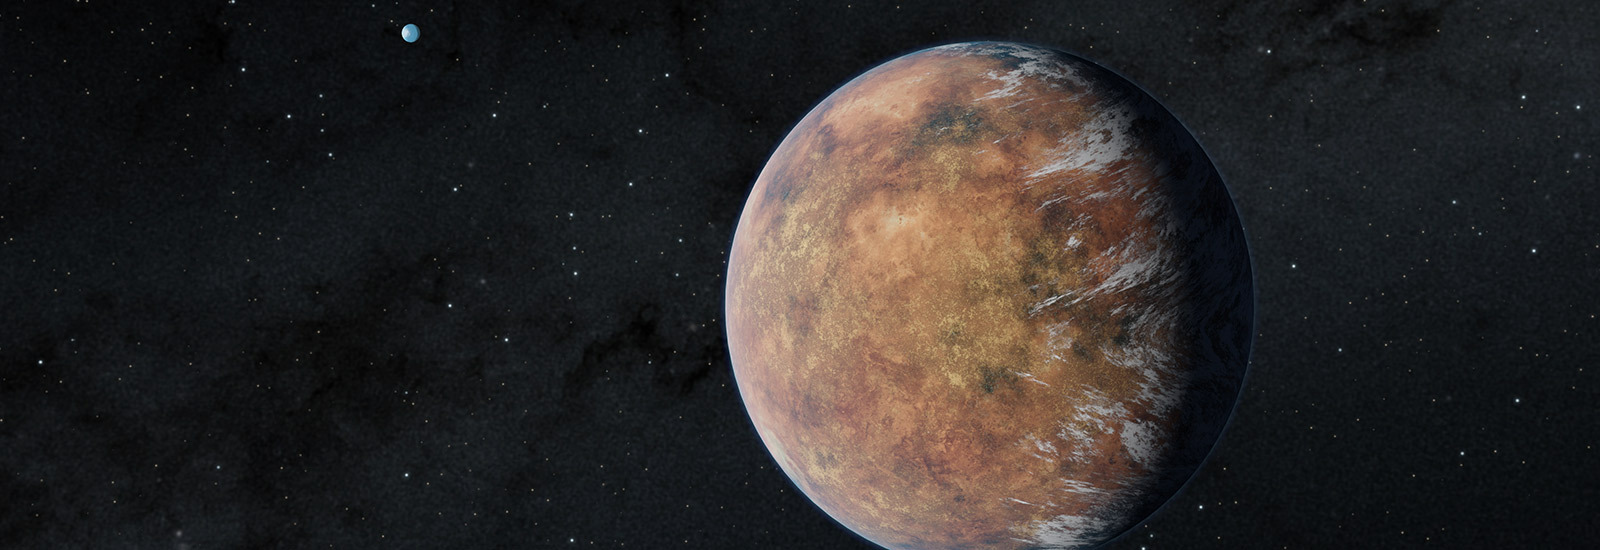 An illustration shows a brownish, rocky exoplanet just right of center. Bright clouds can be seen at the right of the planet, indicating that they could be present on the side of the planet not facing the unseen star. Newly discovered Earth-size planet TOI 700 e orbits within the habitable zone of its star in this illustration. Its Earth-size sibling, TOI 700 d, can be seen in the distance in dark, star-filled space. 